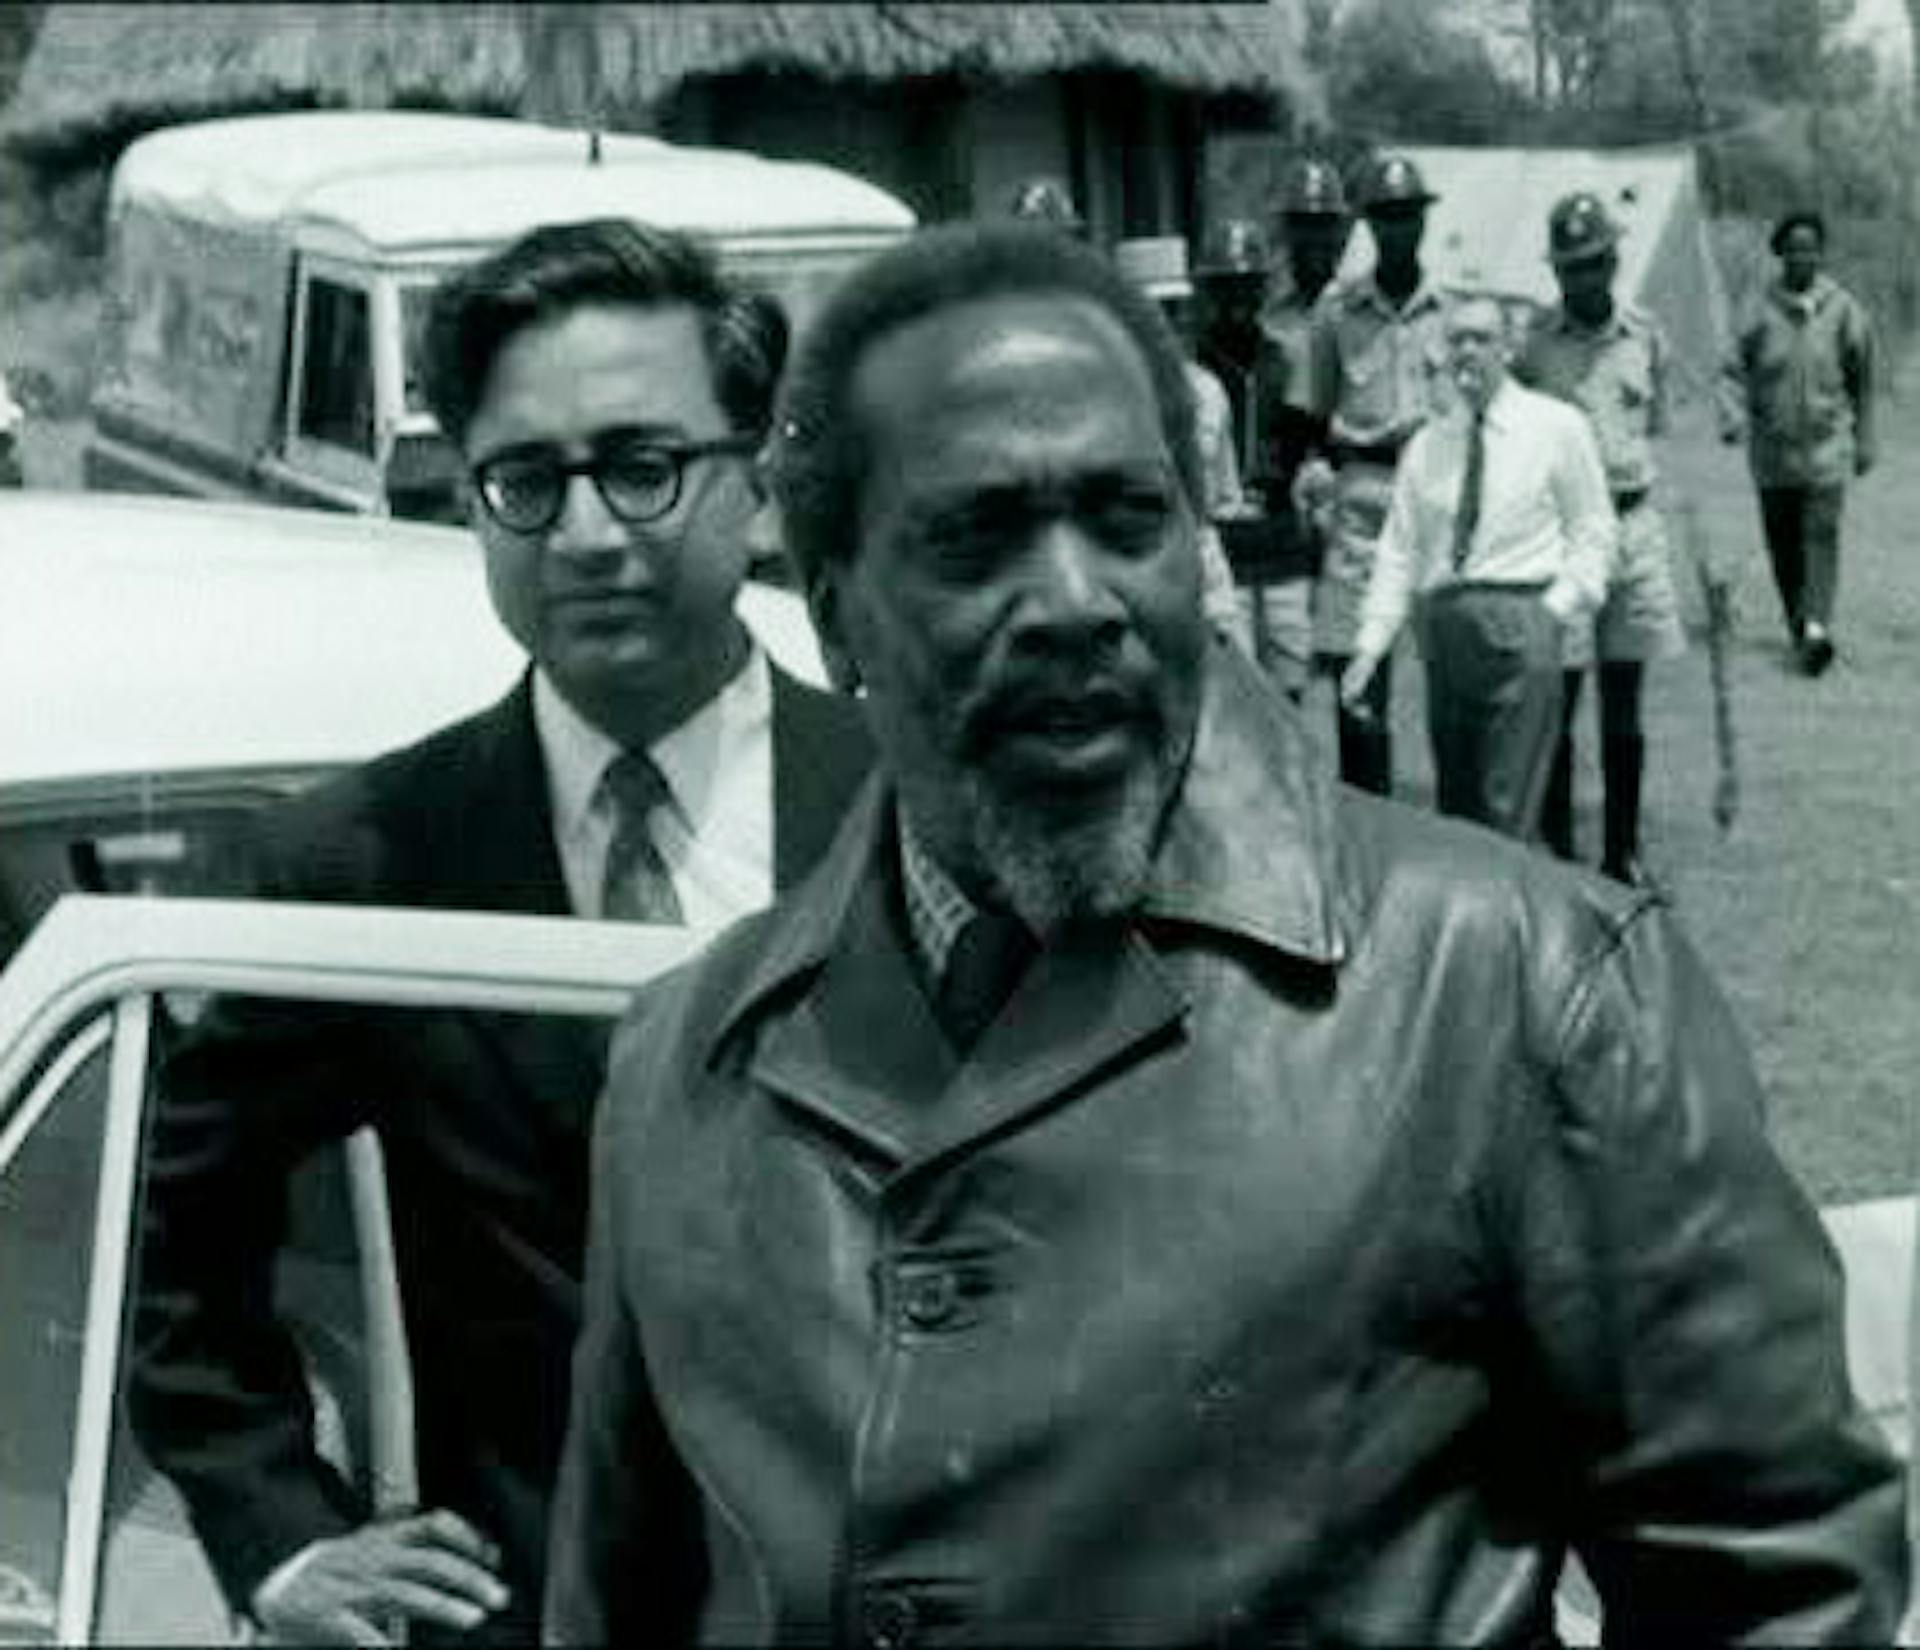 Kenyatta and Kapila in Maralal on the day of the press meet in April 1961. Courtesy: Suman Mahan’s collection.